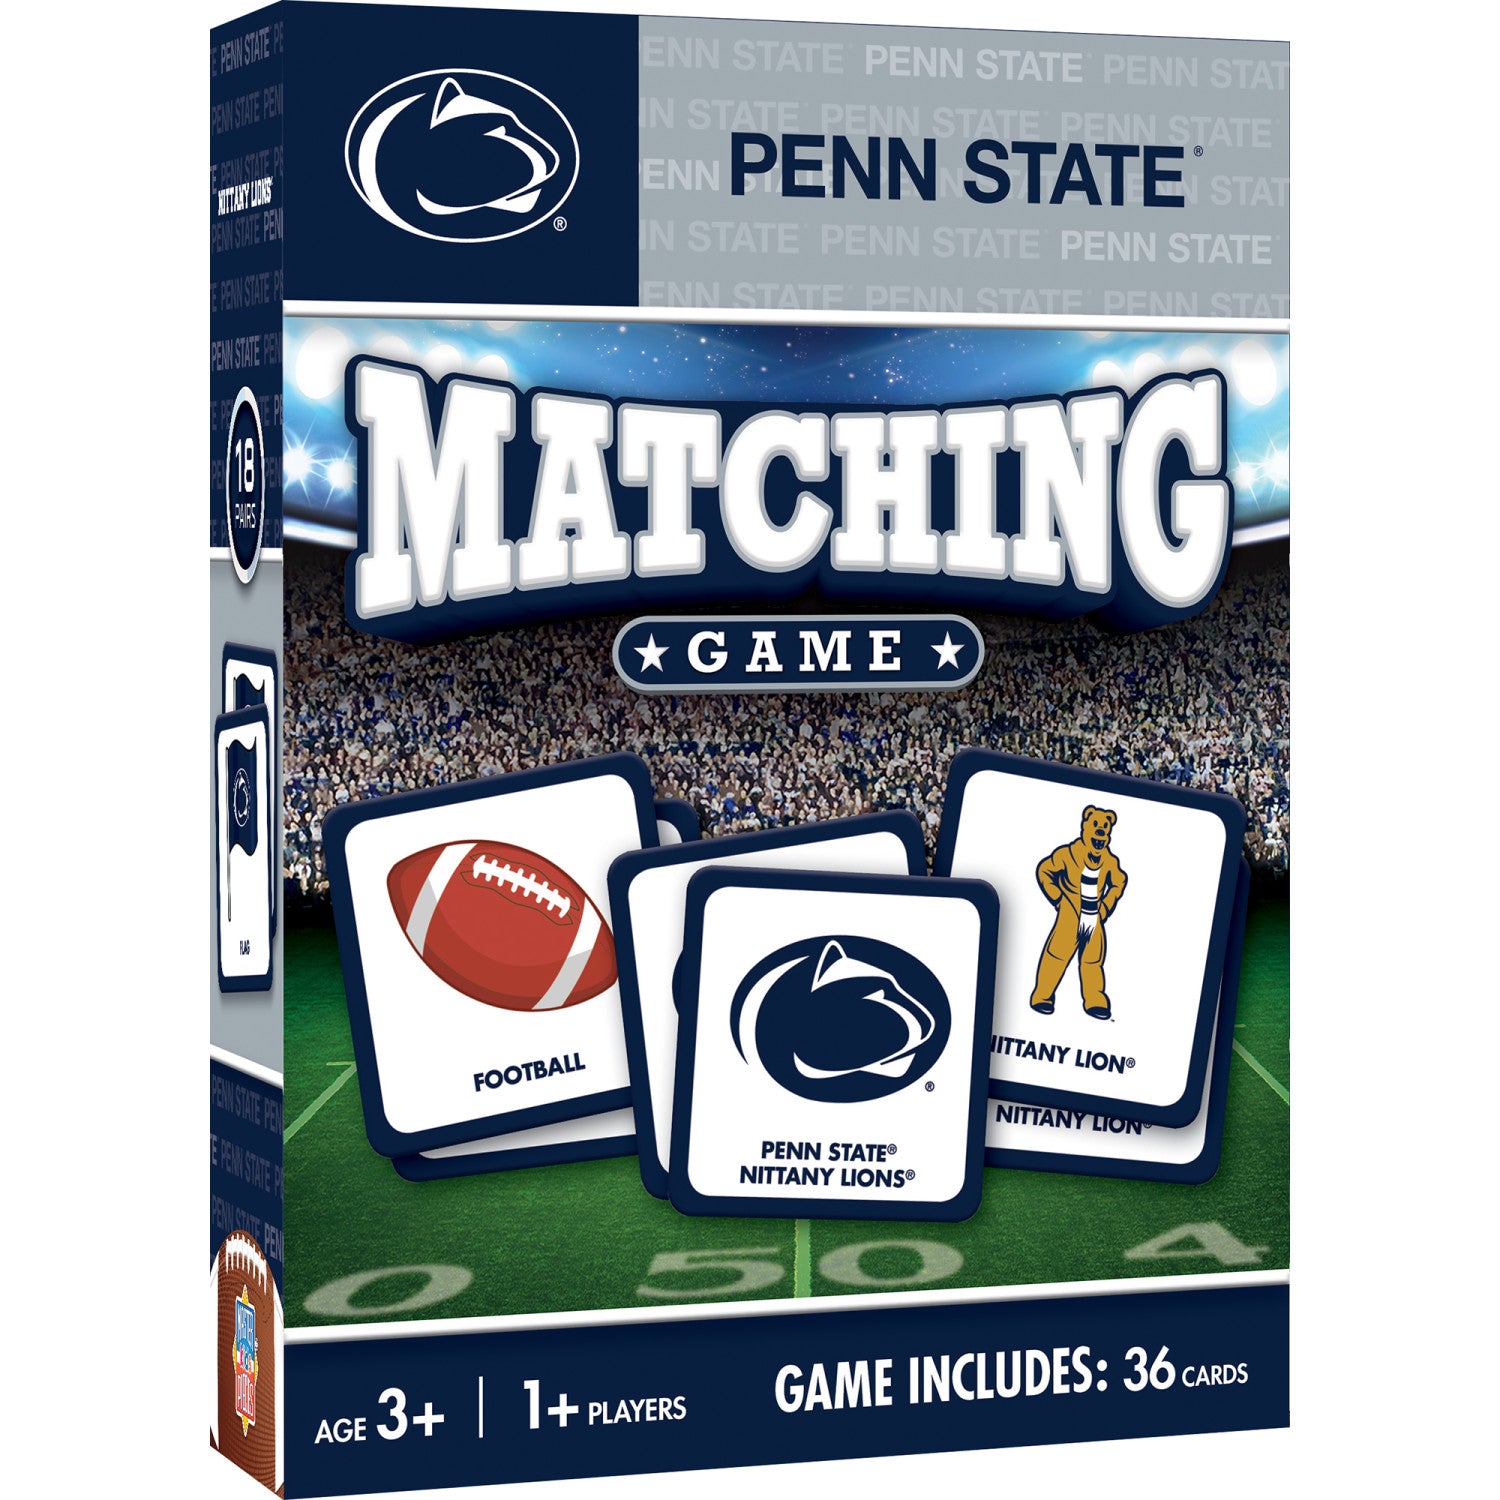 Penn State Nittany Lions Matching Game